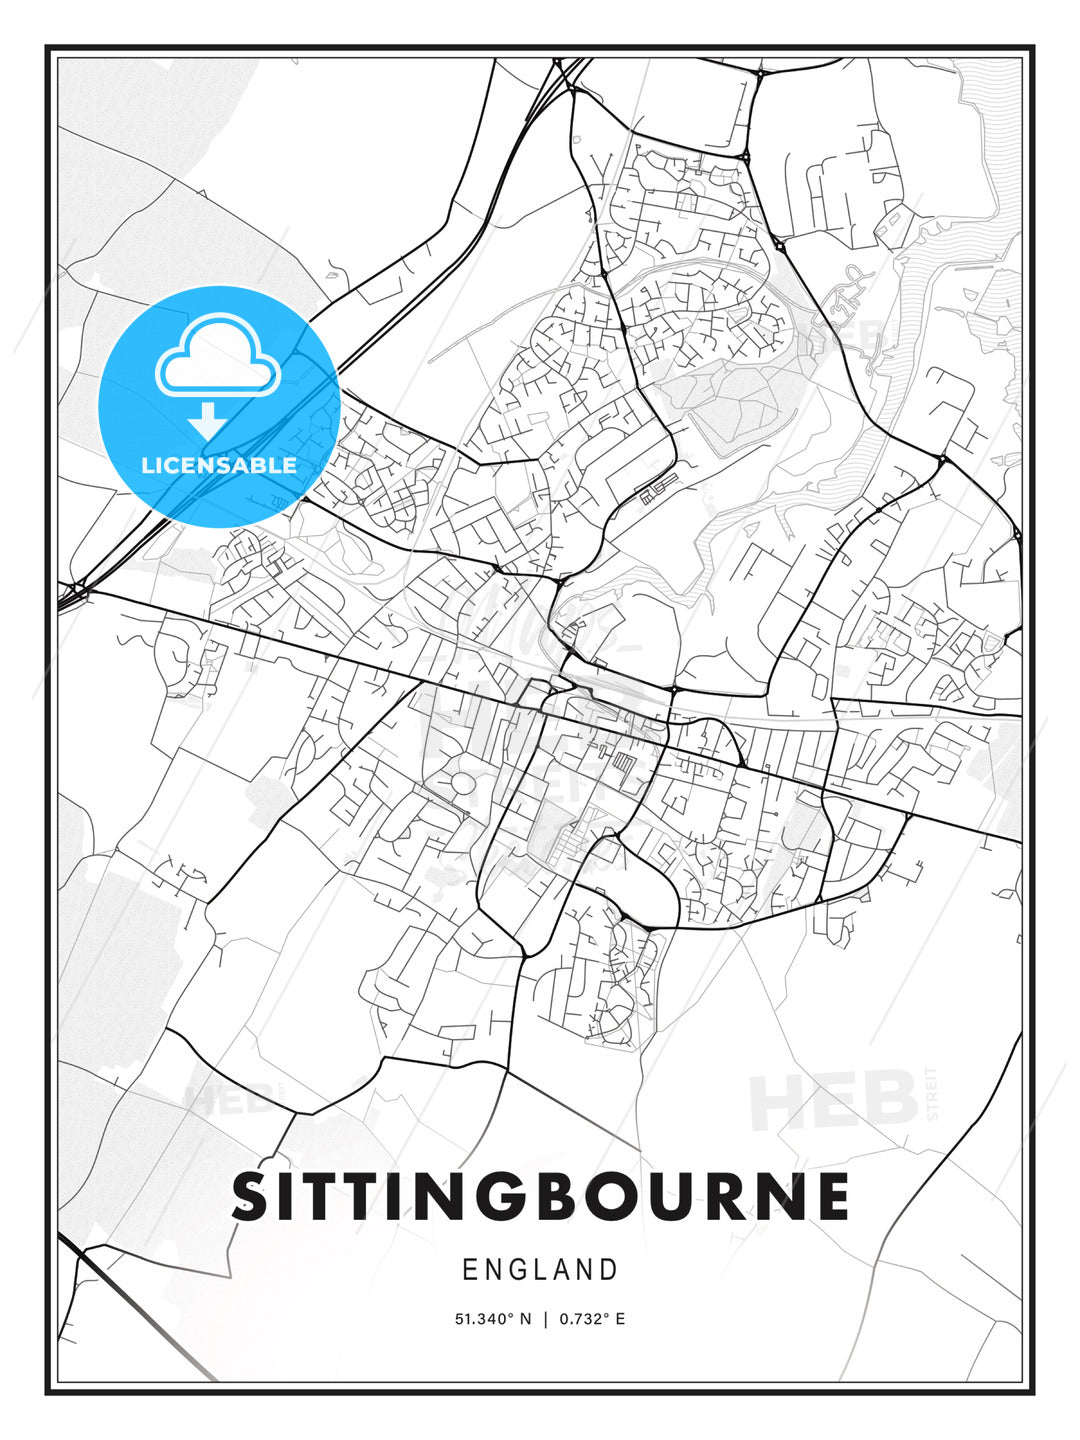 Sittingbourne, England, Modern Print Template in Various Formats - HEBSTREITS Sketches